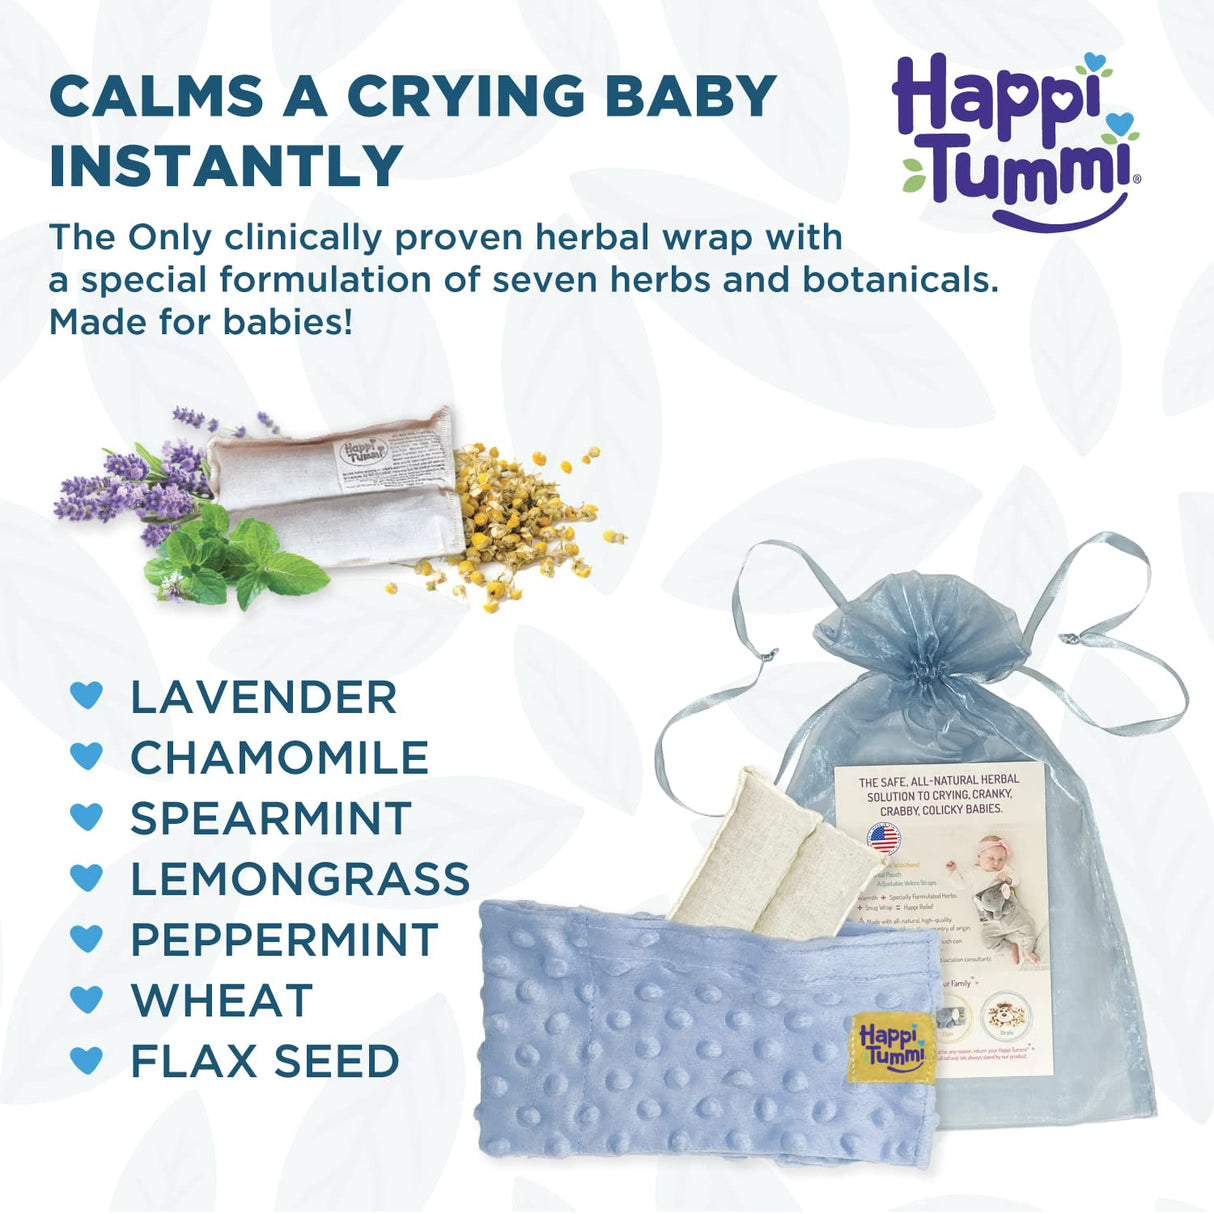 Happi Tummi Baby Gas Relief All Natural Belly Wrap Natural Herbal Aroma Therapy Relief for Infants and Babies with Colic, Gas,Upset Tummies - Blue Plush